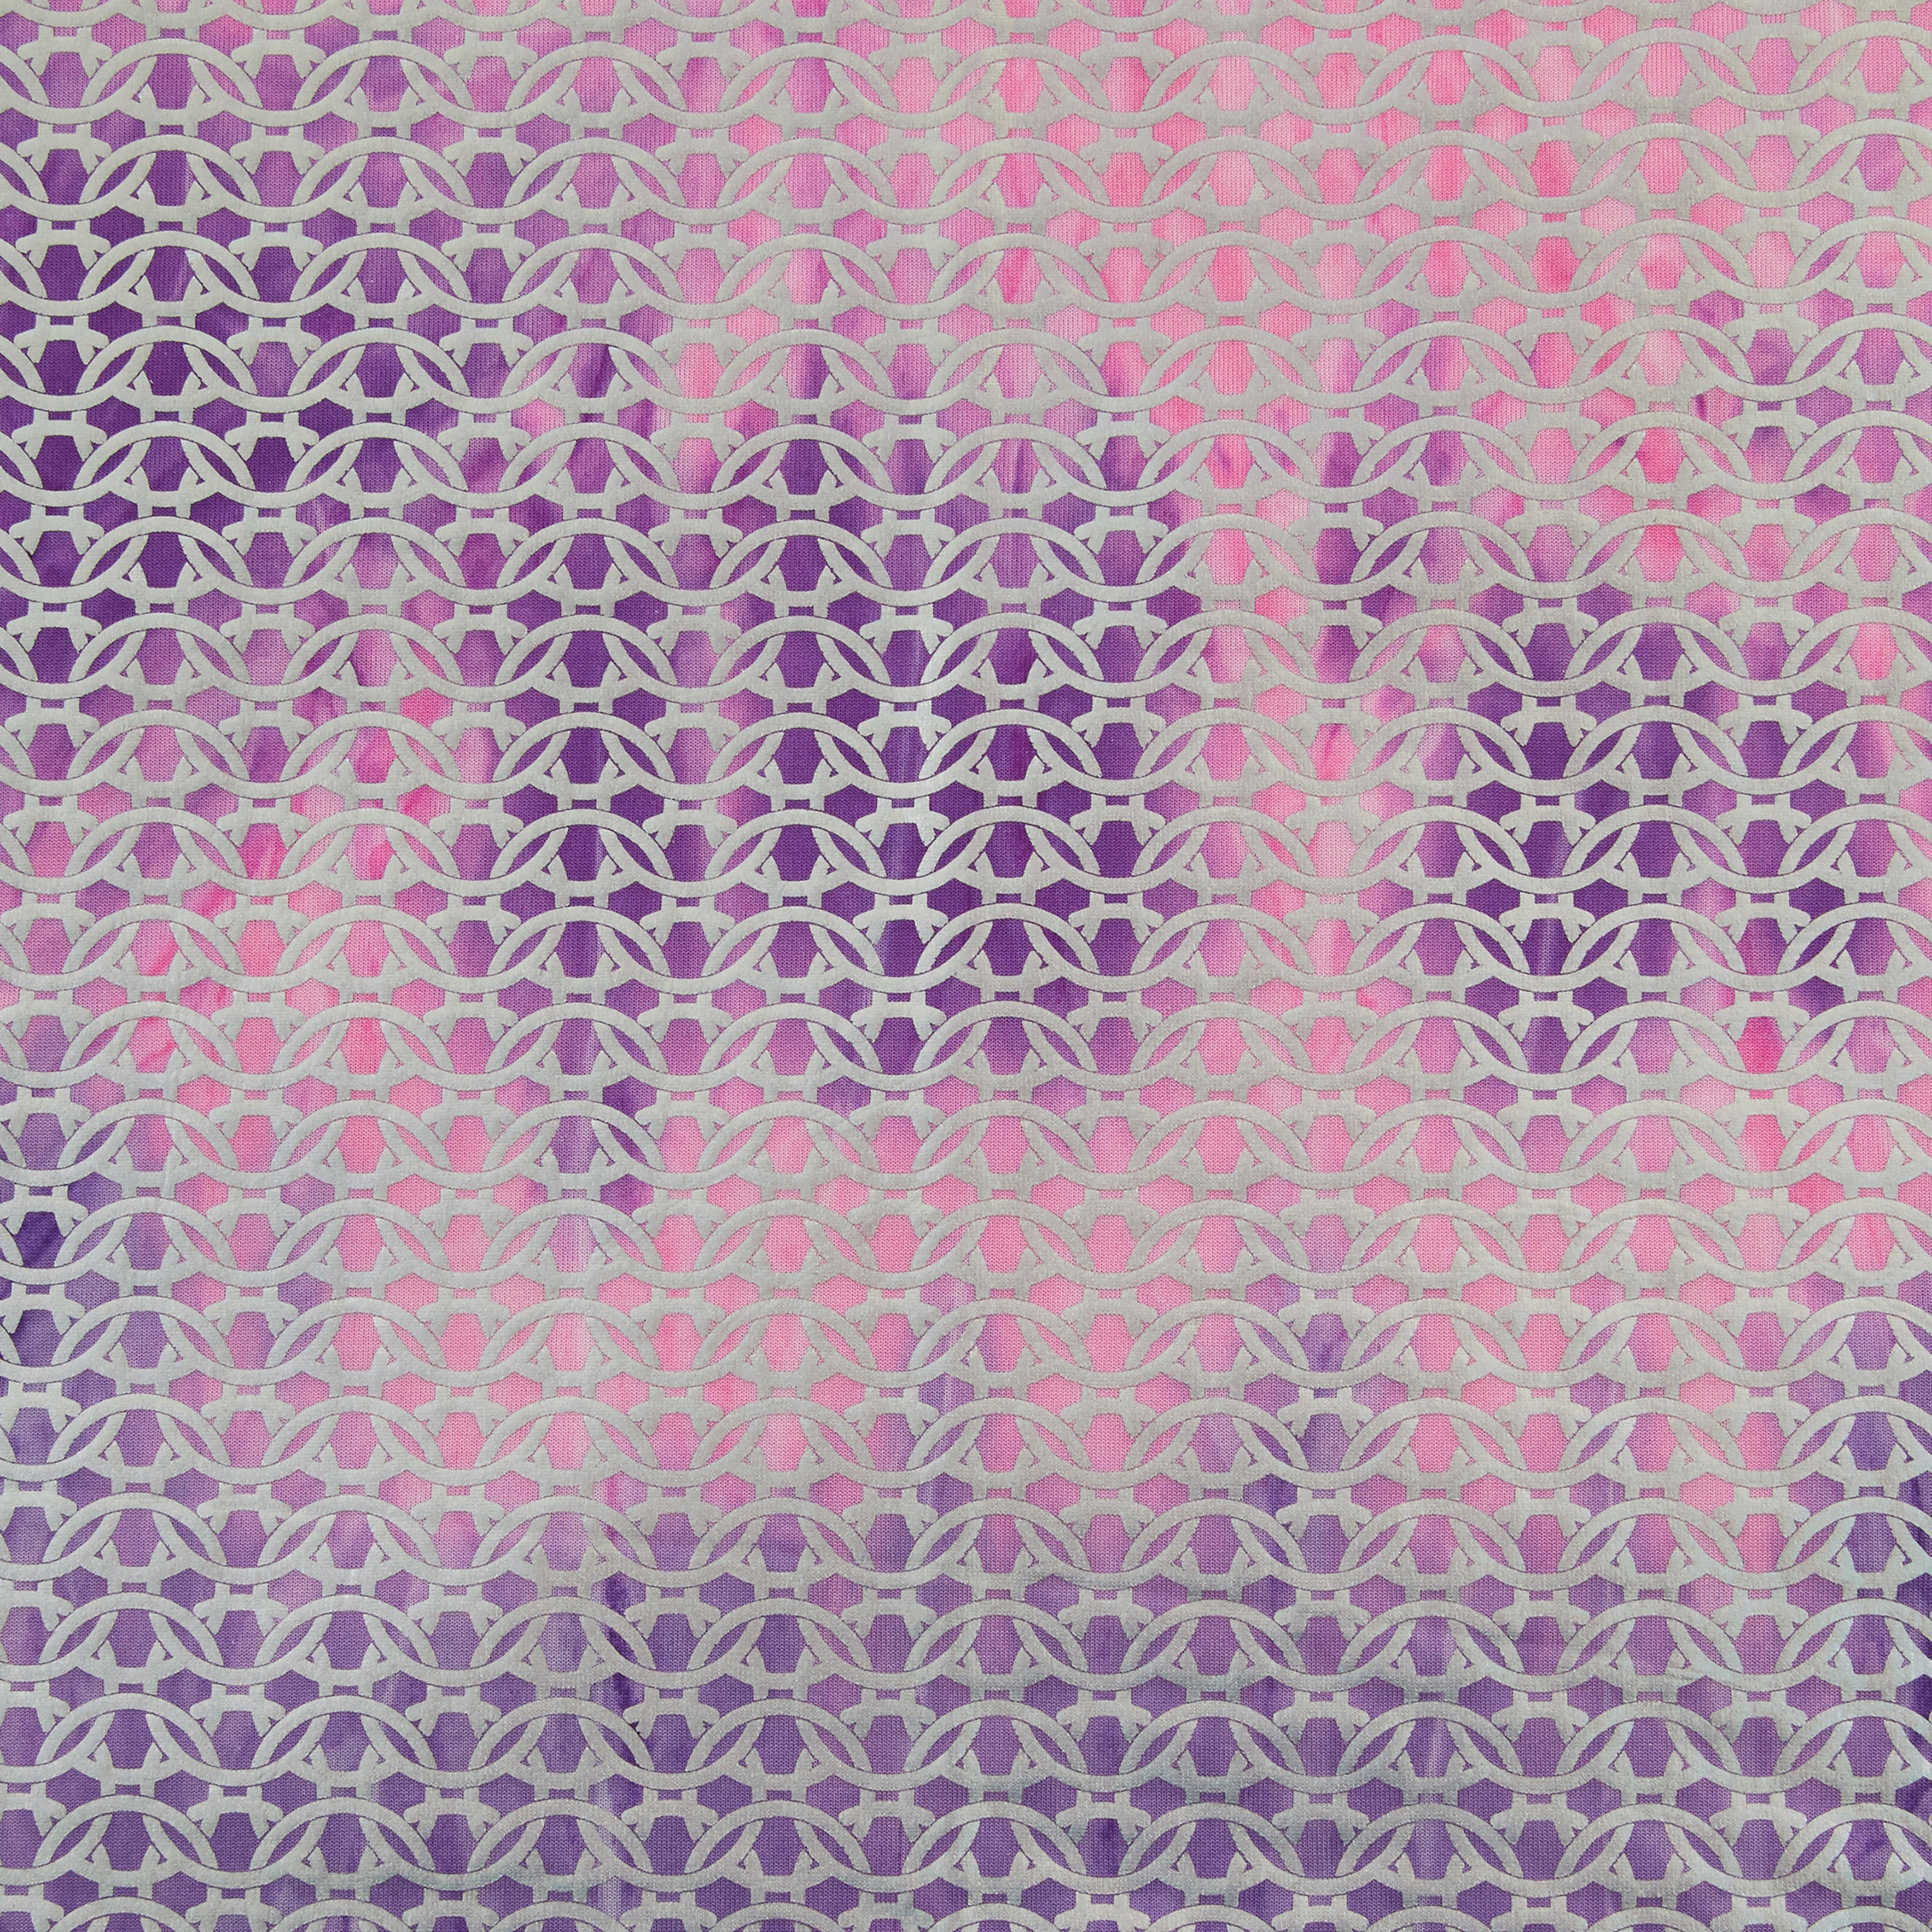 4-Way Stretch Fabric, Chainlink Silver Foiled, Pink & Purple